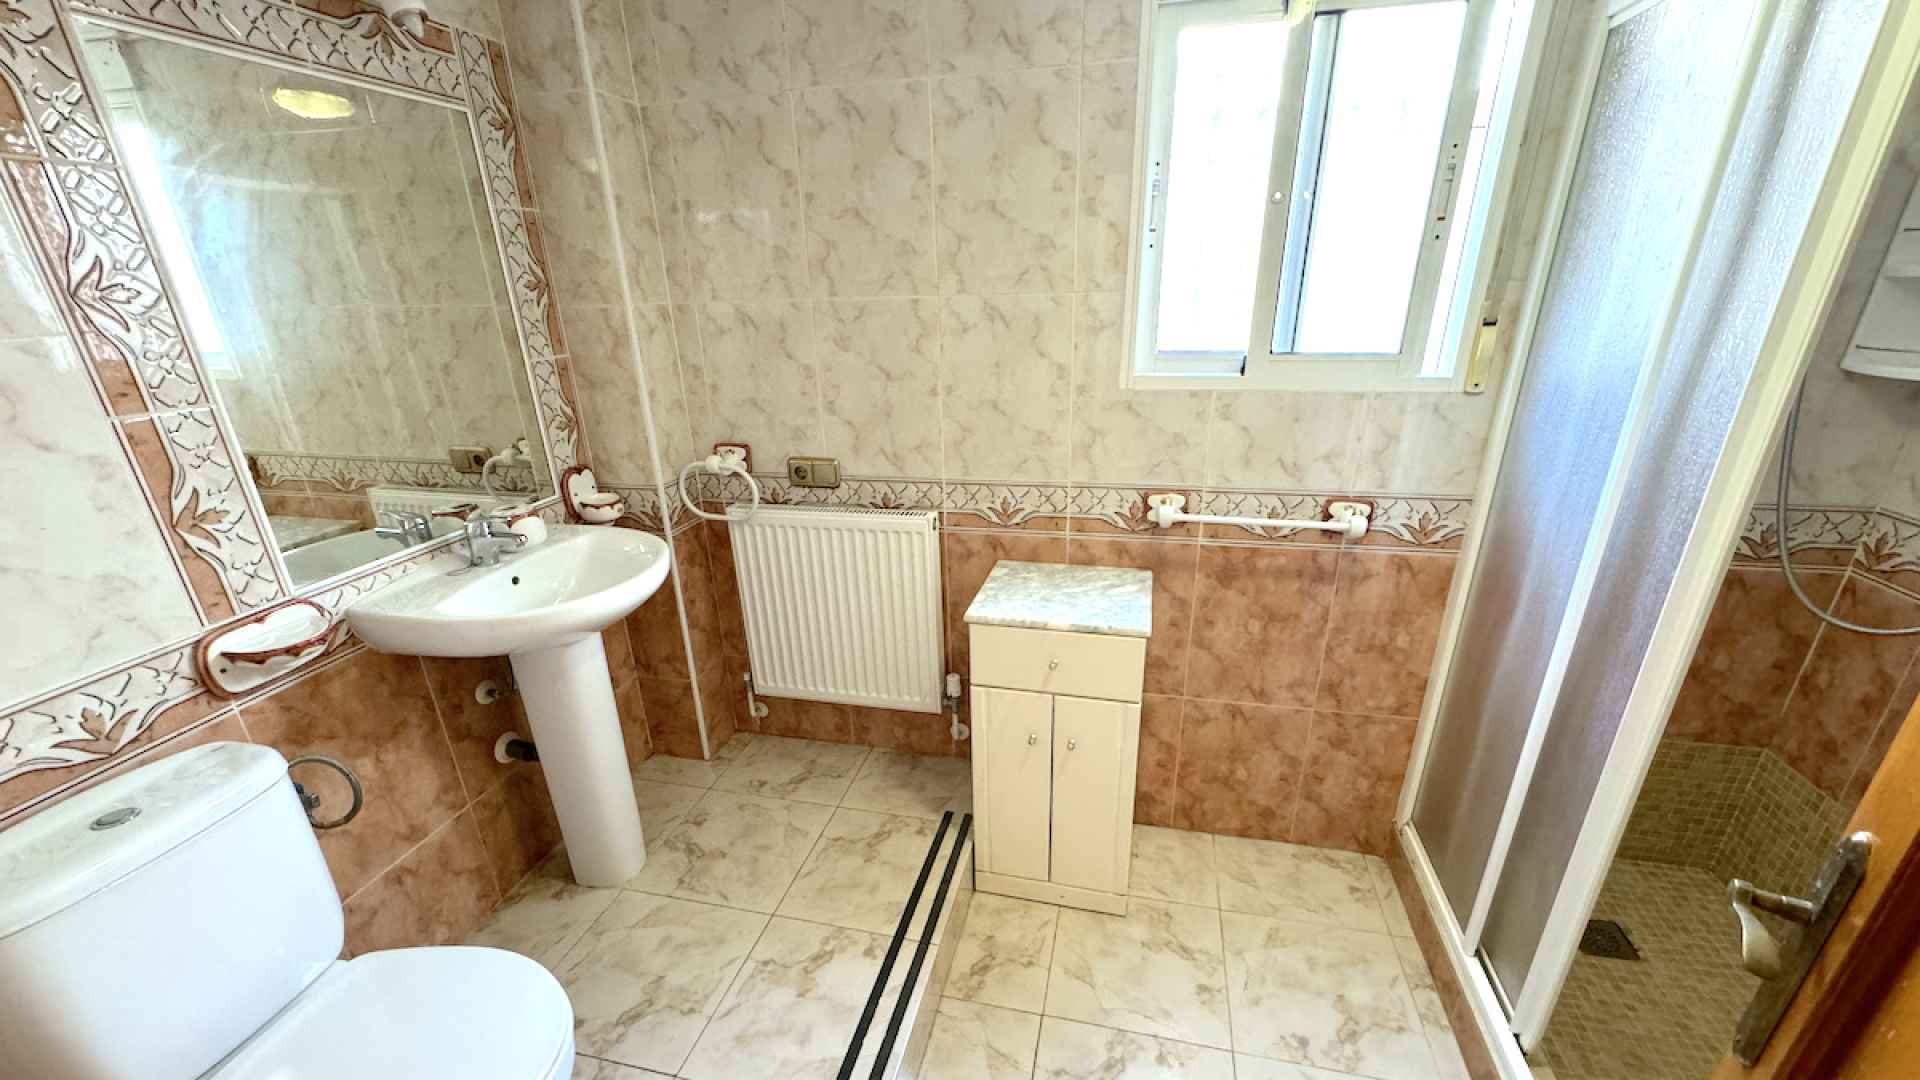 48371_exceptionally_spacious_detached_villa_with_guest_accommodation_080324072500_img_0499